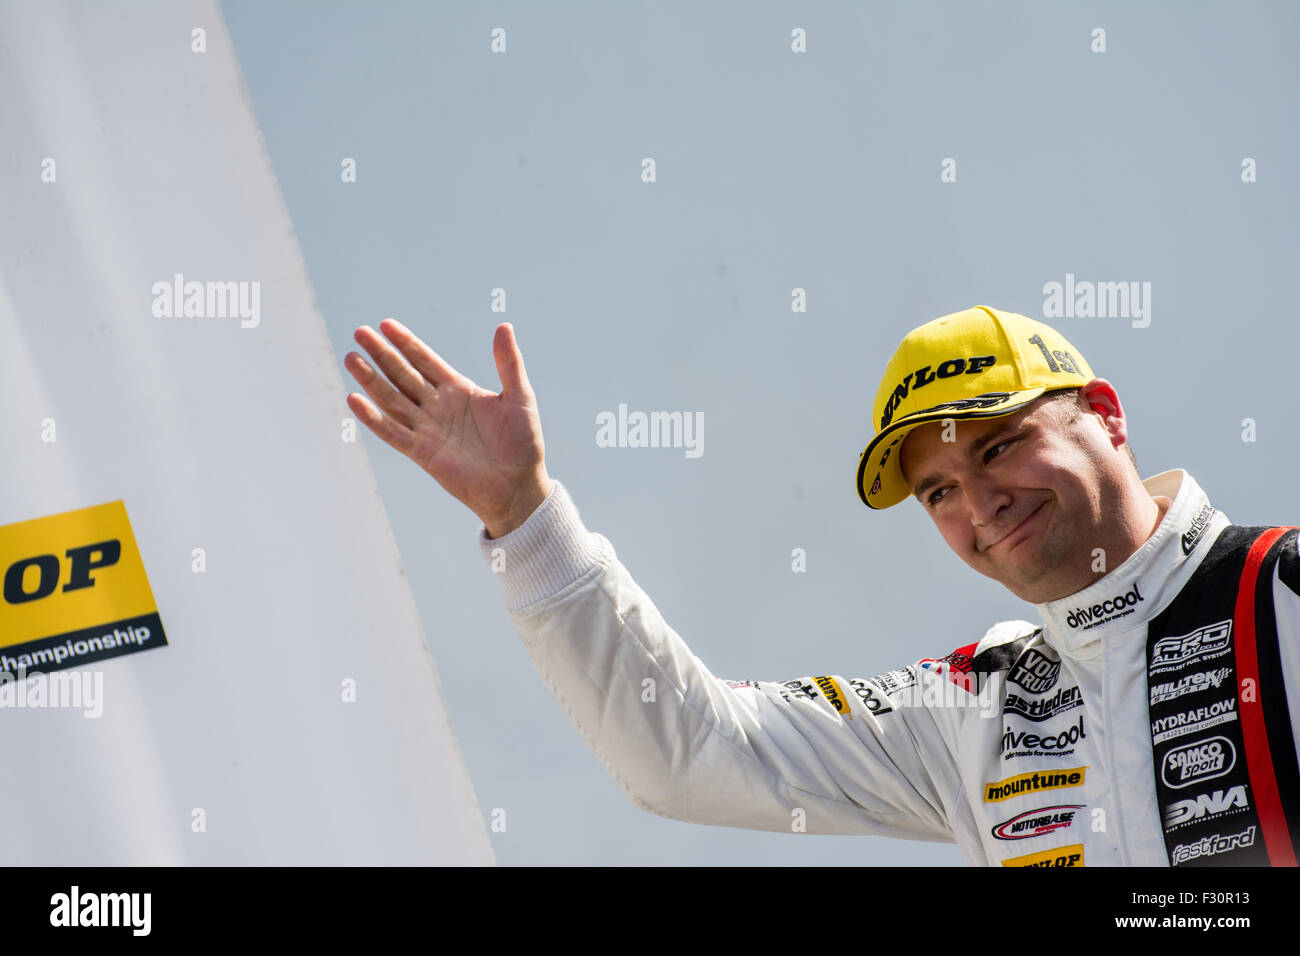 Silverstone, Northamptonshire, UK. 27th Sep, 2015. Mat Jackson and Motorbase Performance celebrates First place finish of the Dunlop MSA British Touring Car Championship at Silverstone Circuit on September 27, 2015 in Silverstone, United Kingdom (Photo by Gergo Toth Photo / Alamy Live News) Credit:  Gergo Toth/Alamy Live News Stock Photo